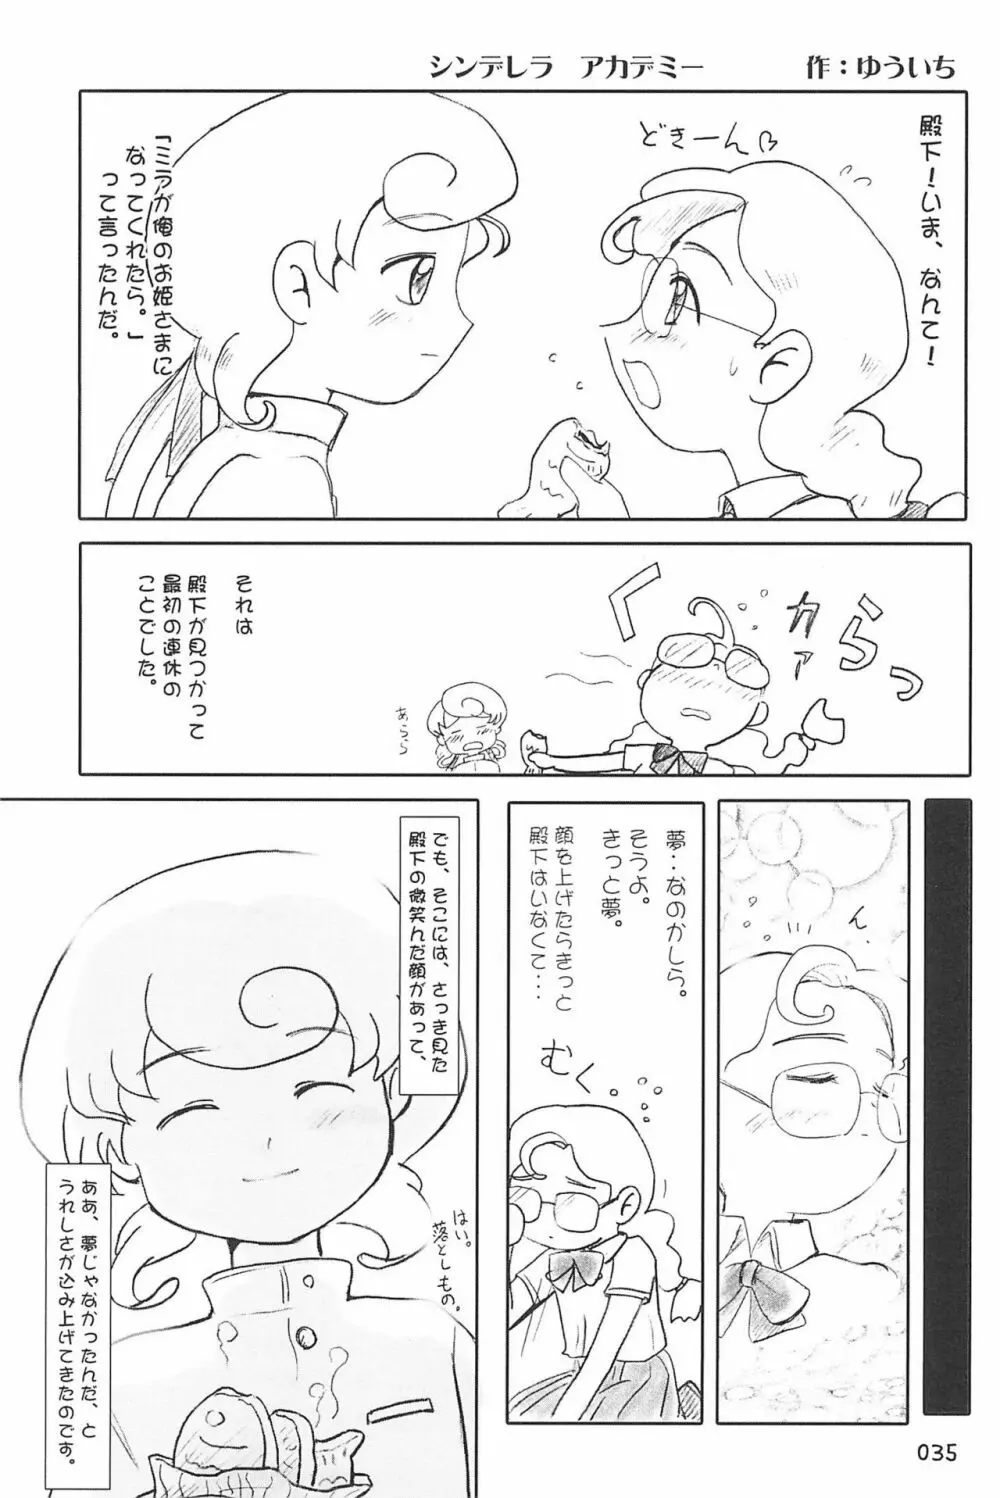 ND-special Volume 4 Page.35